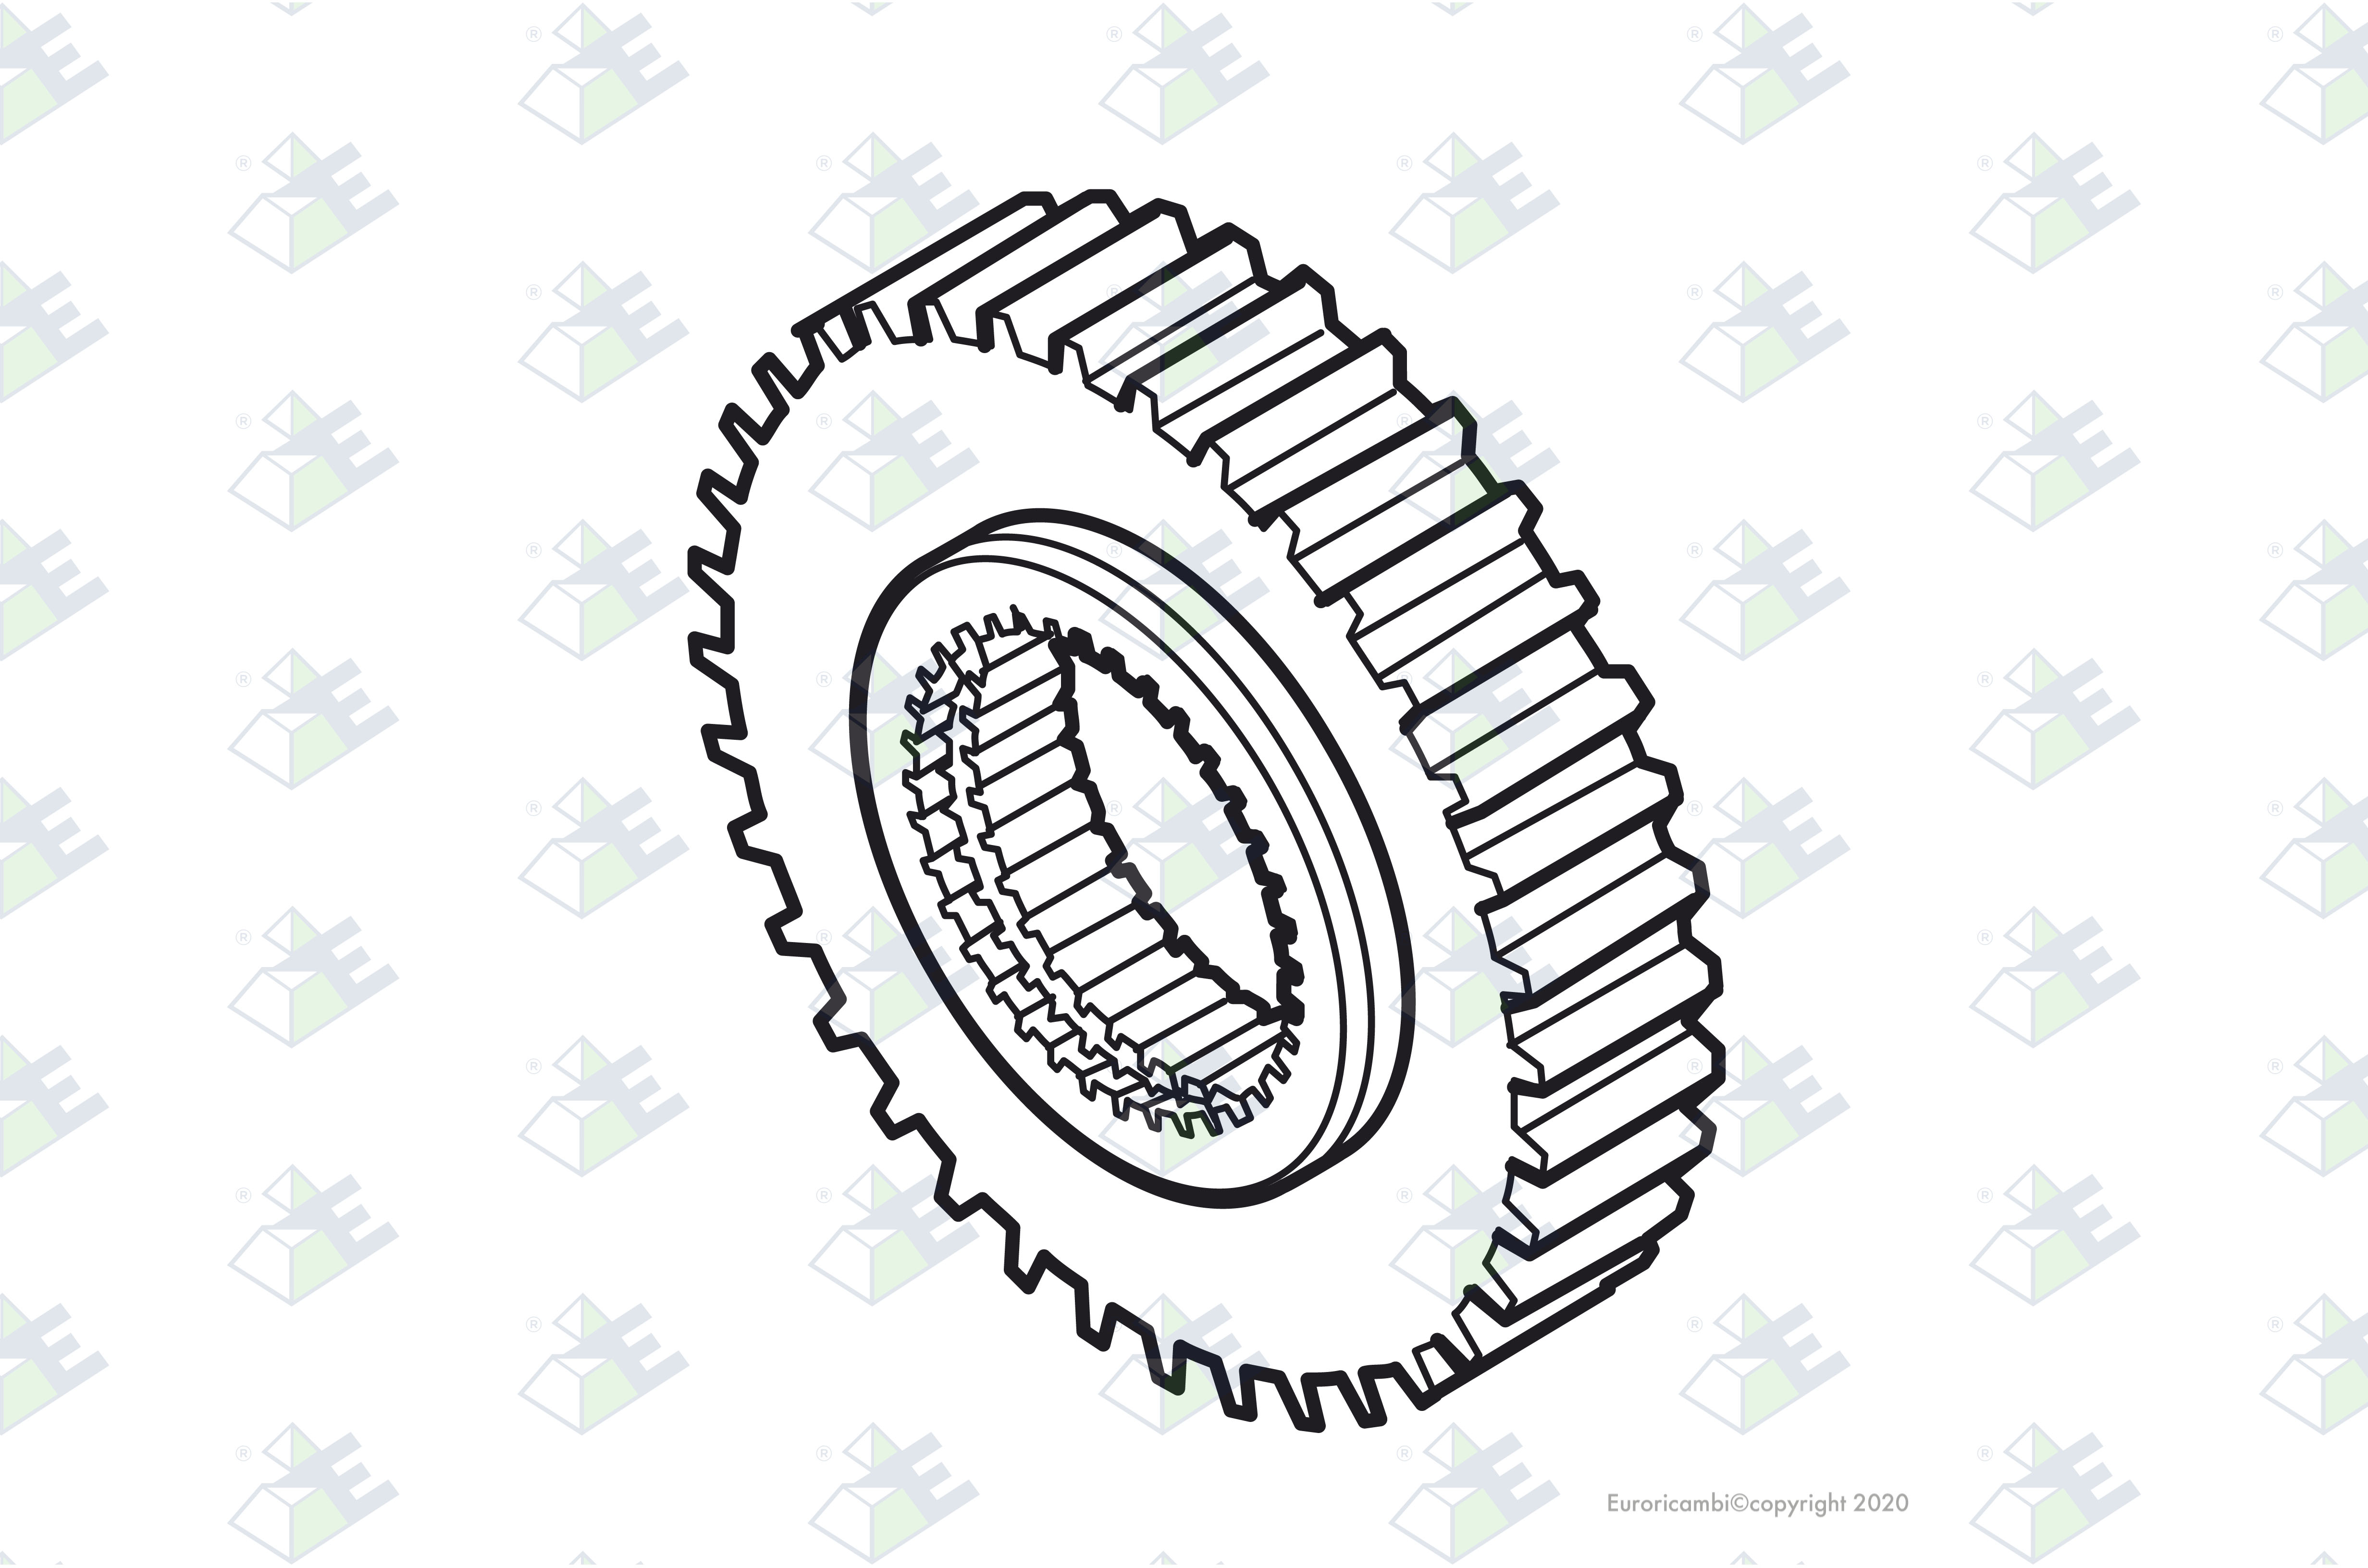 GEAR M/S 26 T. suitable to CHEVROLET TRUCK 2018202